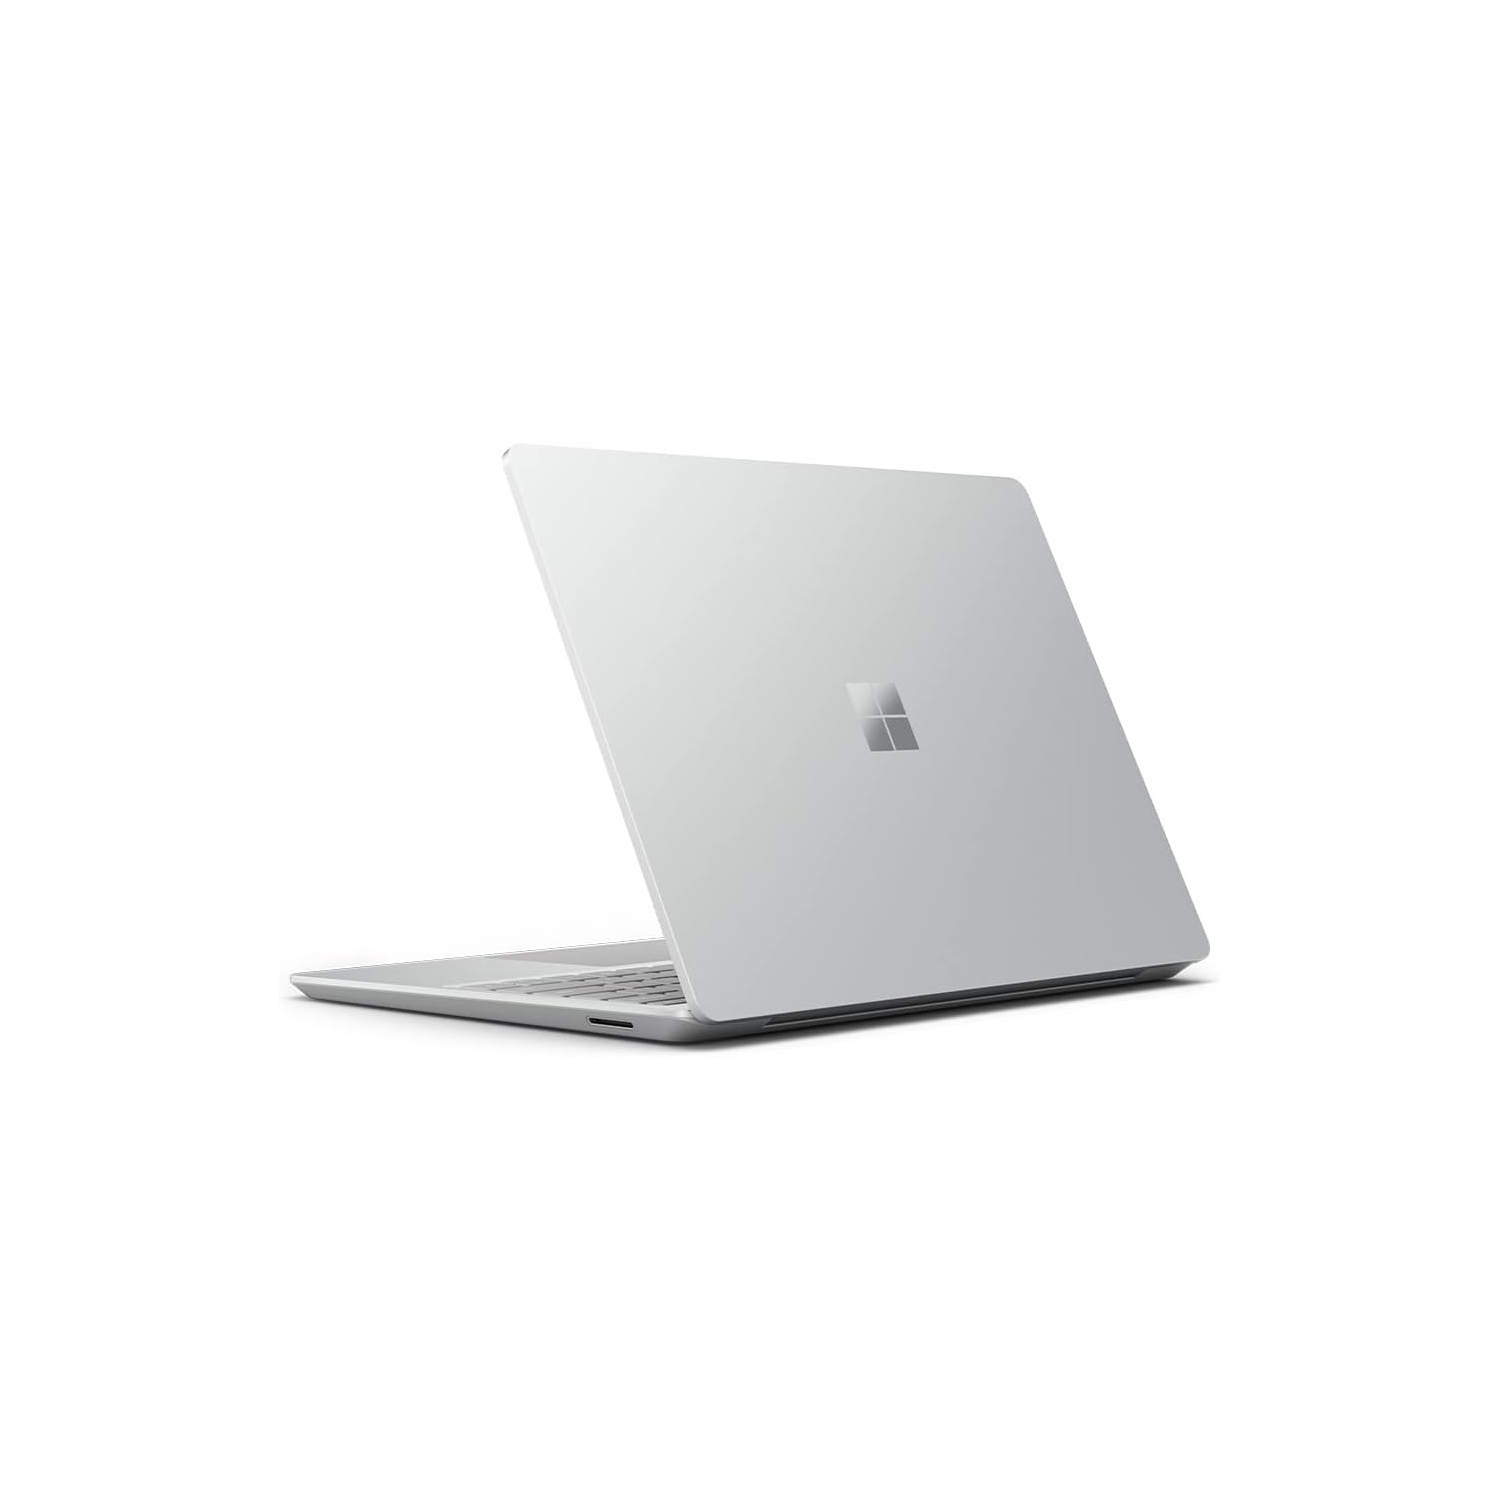 Refurbished (Excellent) Microsoft Surface Laptop Go 2 - Intel Core 